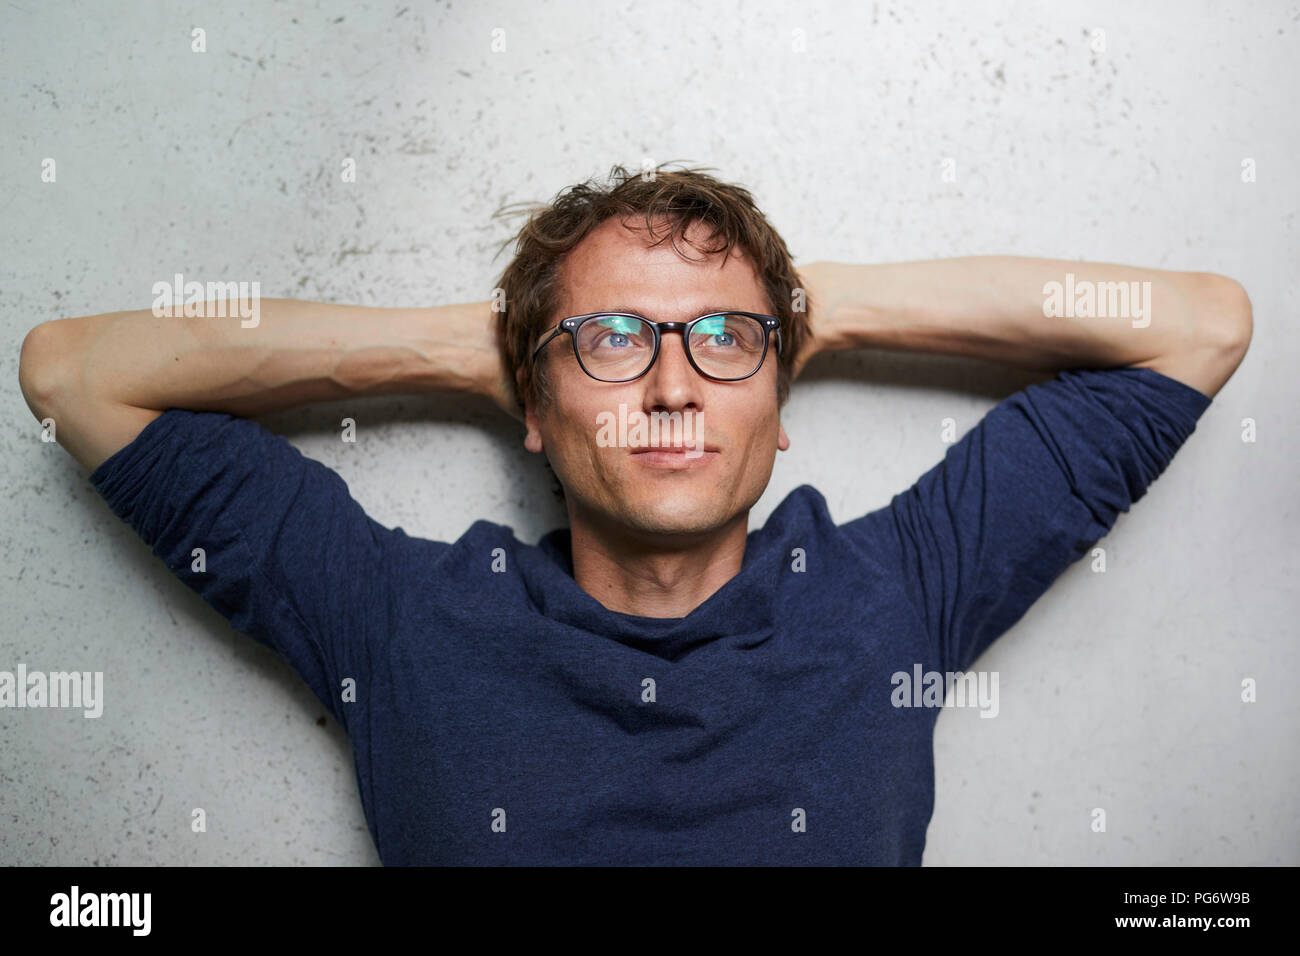 Portrait of man with hands behind head wearing glasses Stock Photo